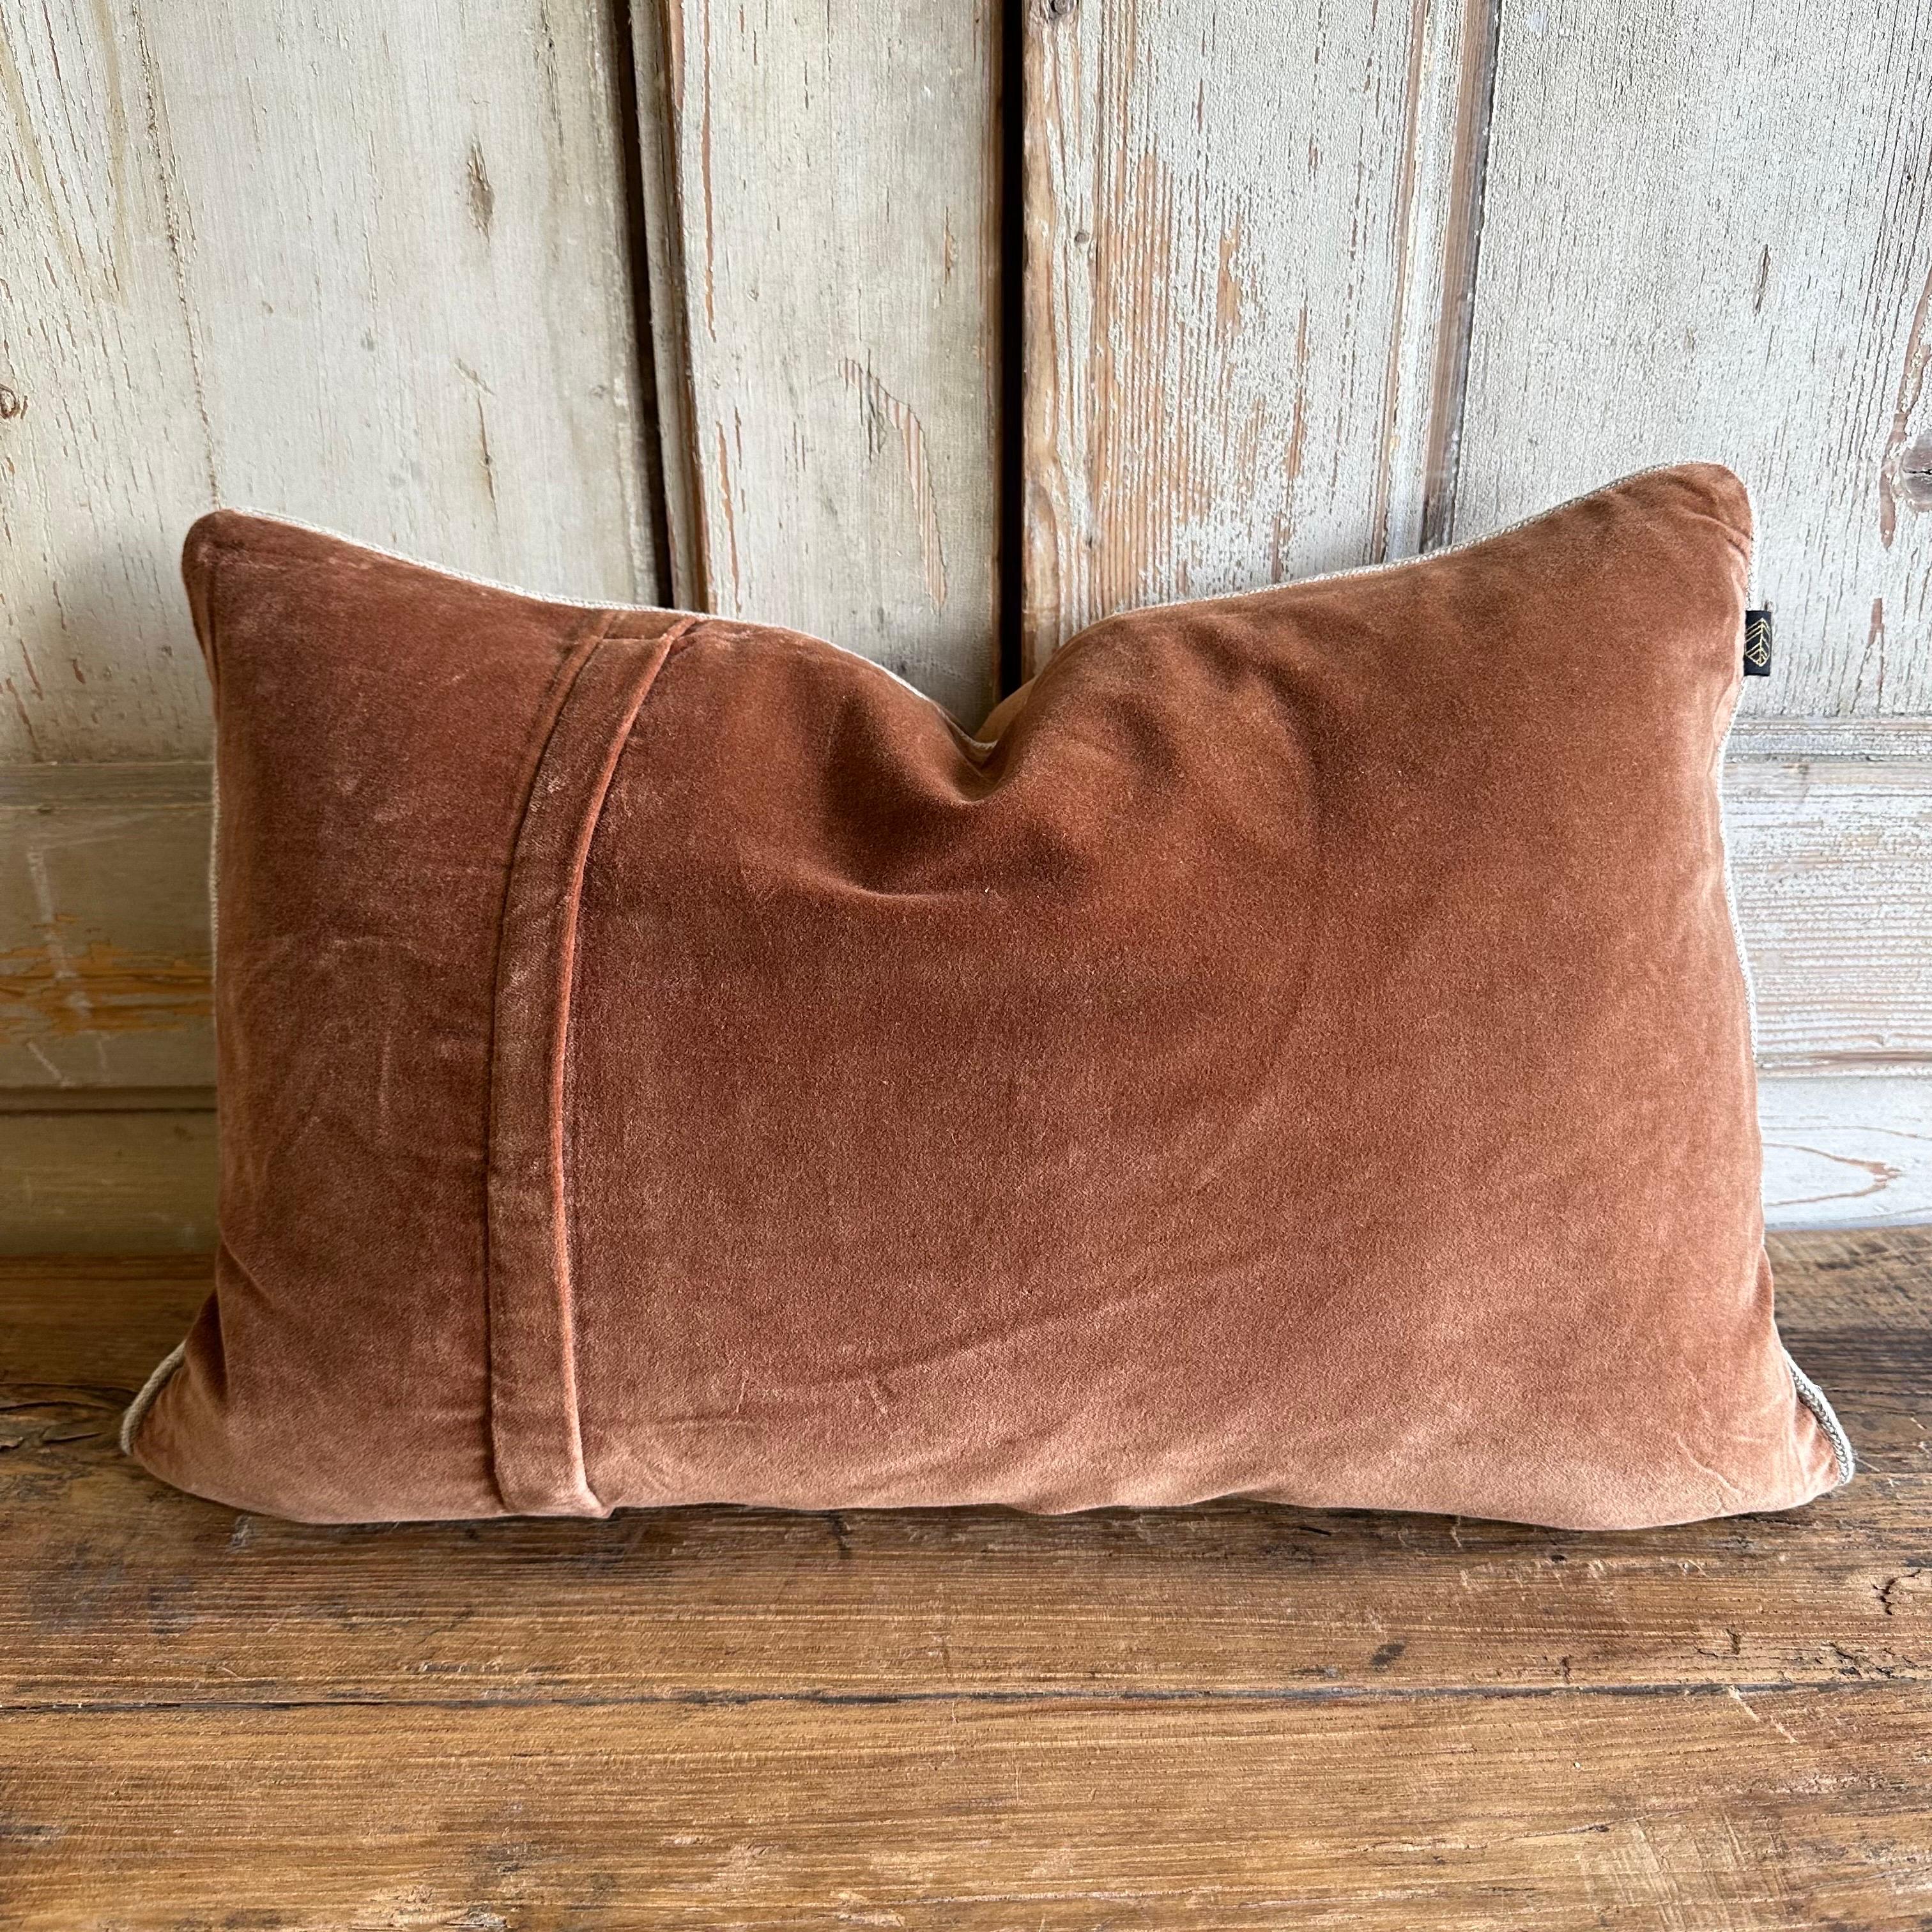 French cotton velvet lumbar pillow with jute trim. Zipper closure, 90/10 down feather insert pillow is included.
Size: 16 x 24
Color: Moka: a rich terracota with brown hues
100% cotton velvet
Linen bourdon finish
Maintenance
Hand wash
No